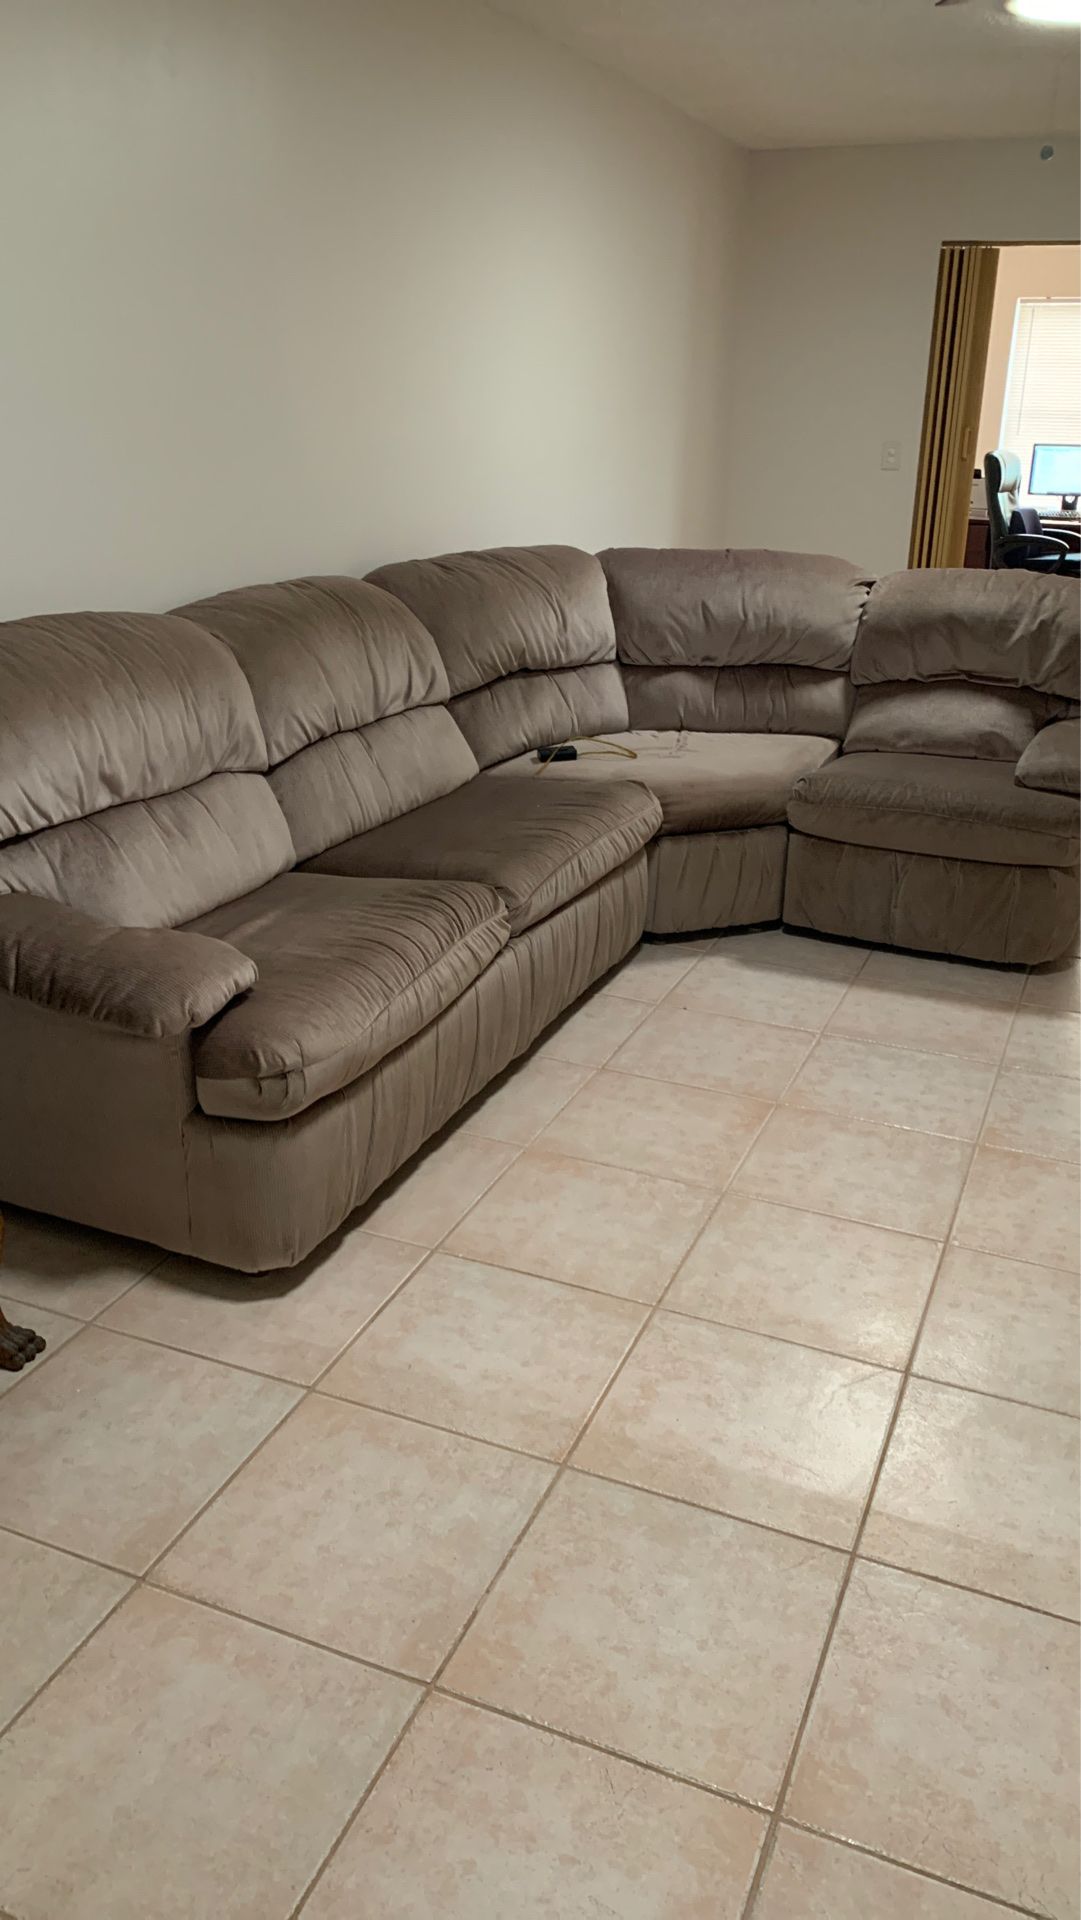 Couch-bed and Recliner. New condition. Well maintained.